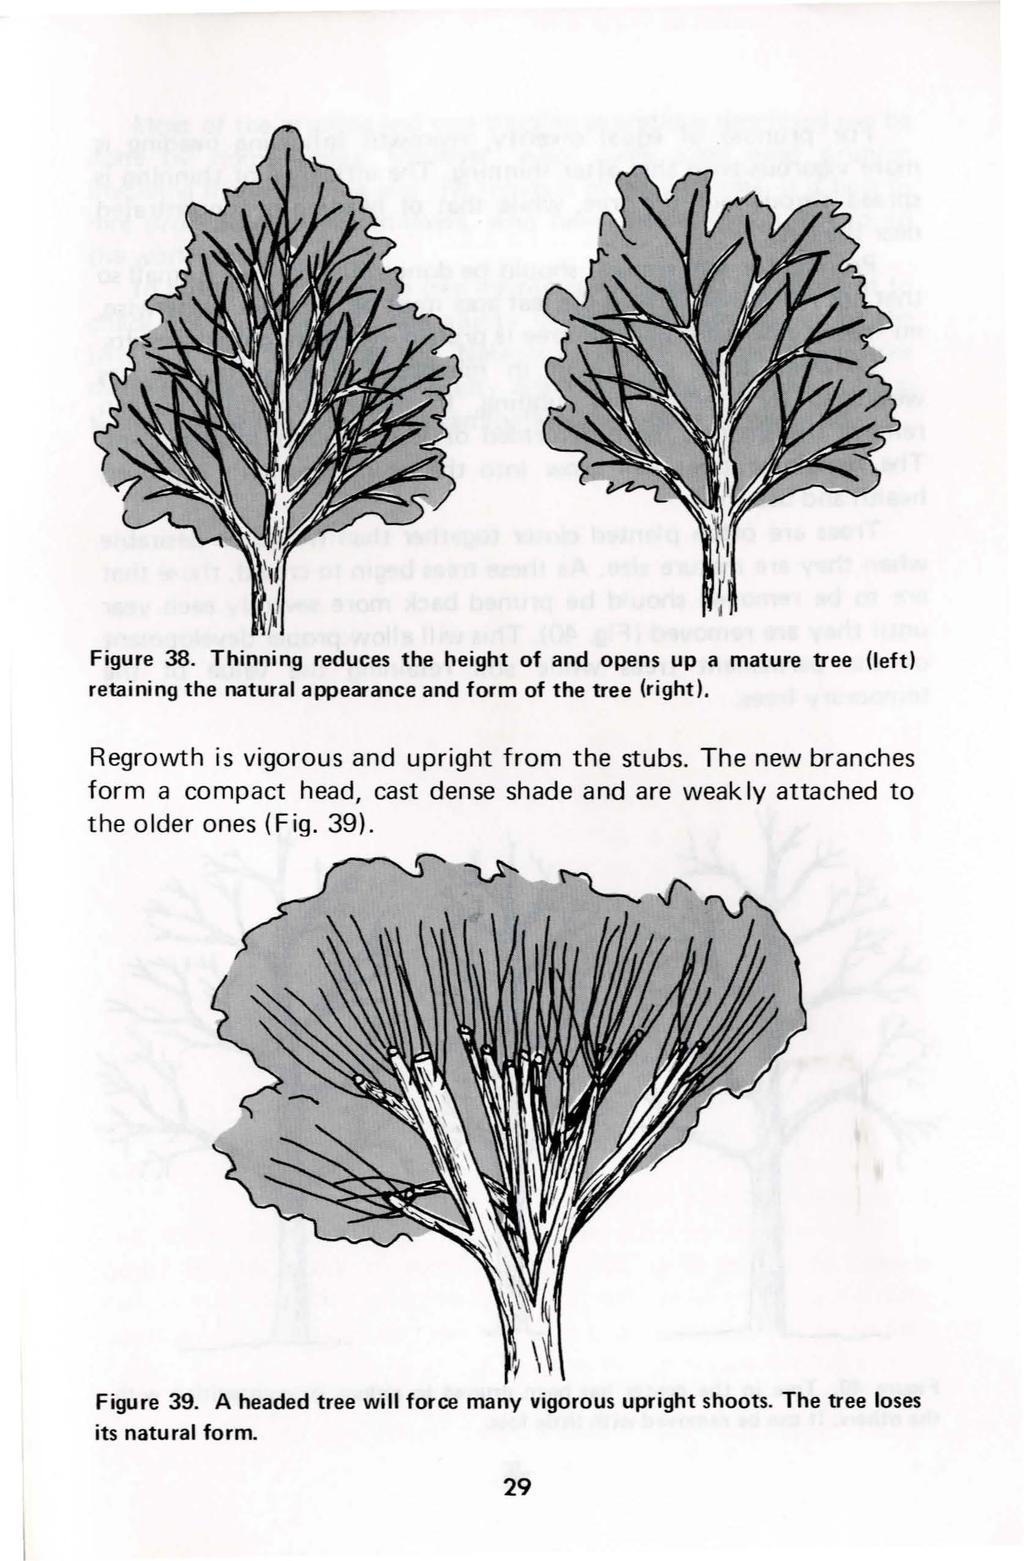 Figure 38. Thinning reduces the height of and opens up a mature tree (left) retaining the natural appearance and form of the tree (right). Regrowth is vigorous and upright from the stubs.